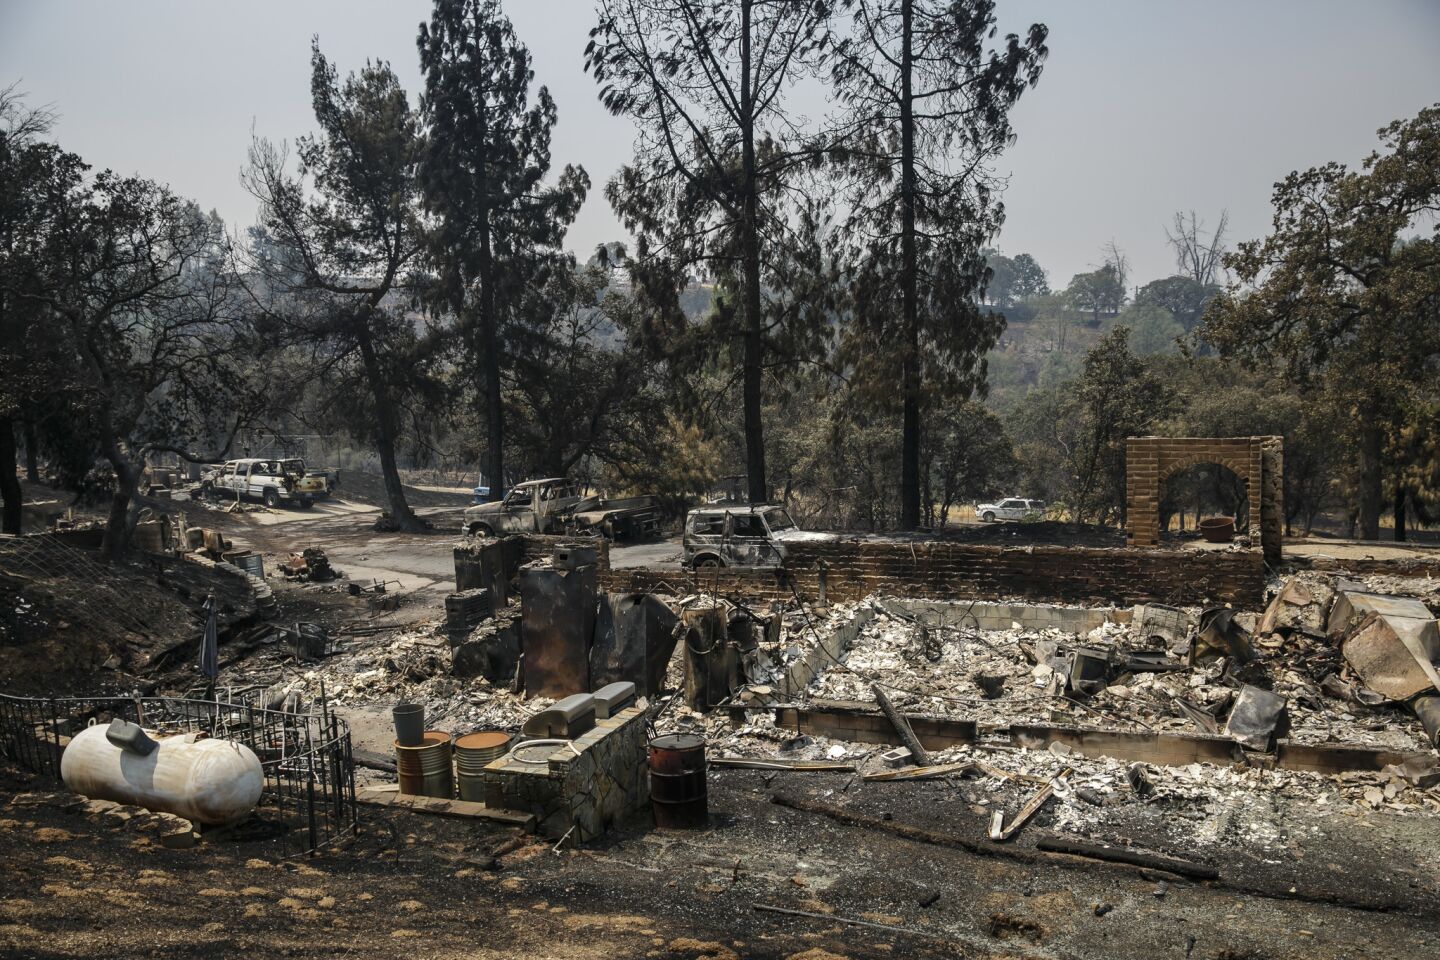 A home destroyed by the Detwiler fire along Hunters Valley Road near Mariposa, Calif.